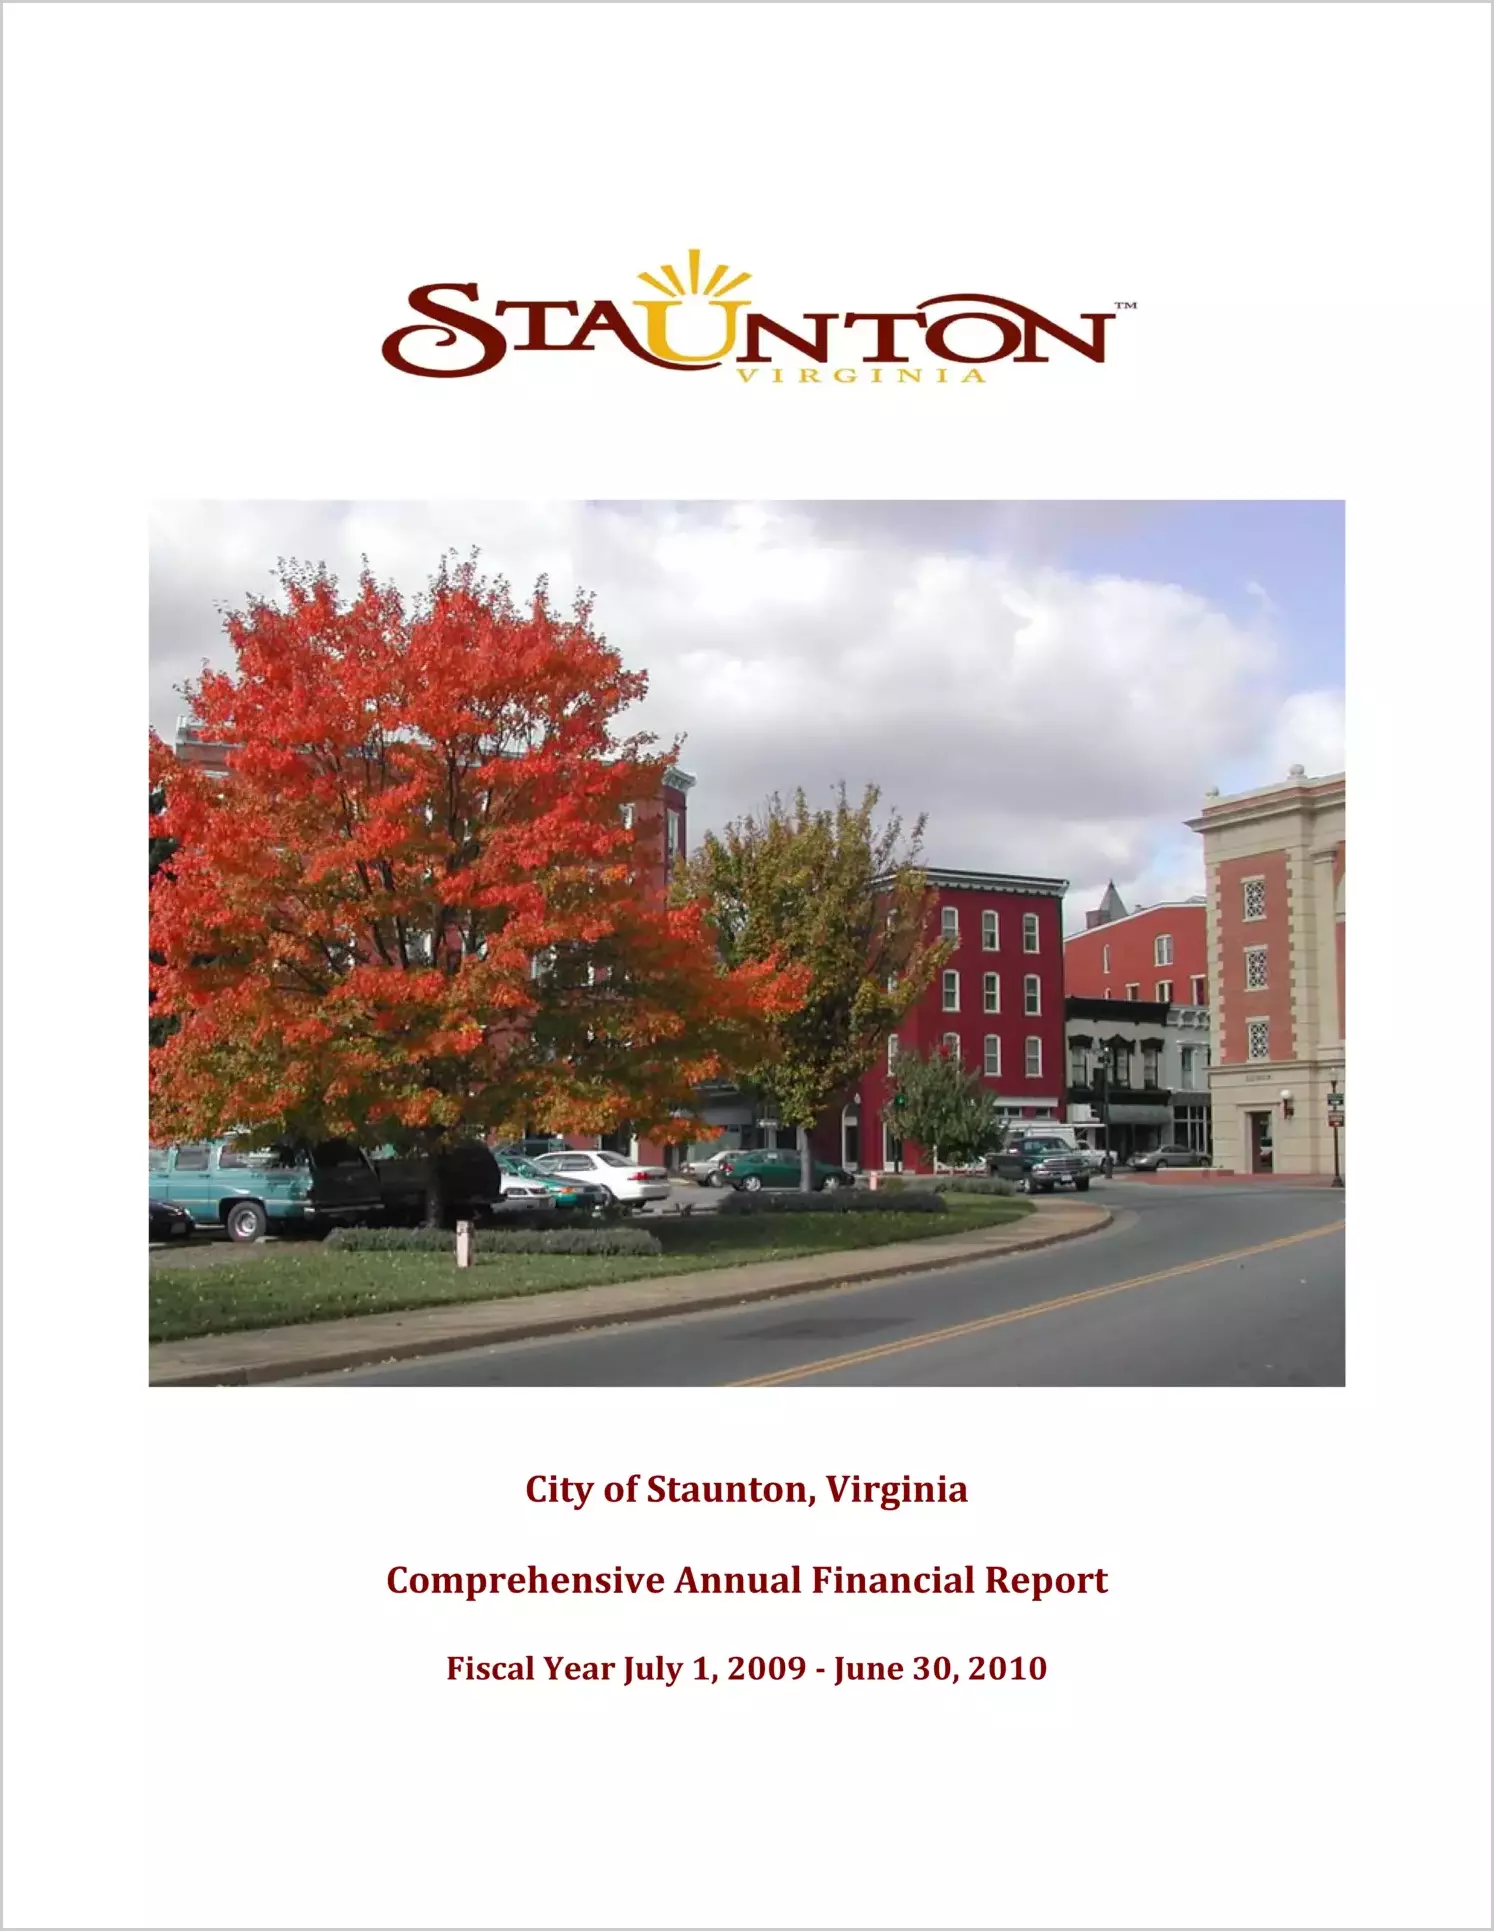 2010 Annual Financial Report for City of Staunton